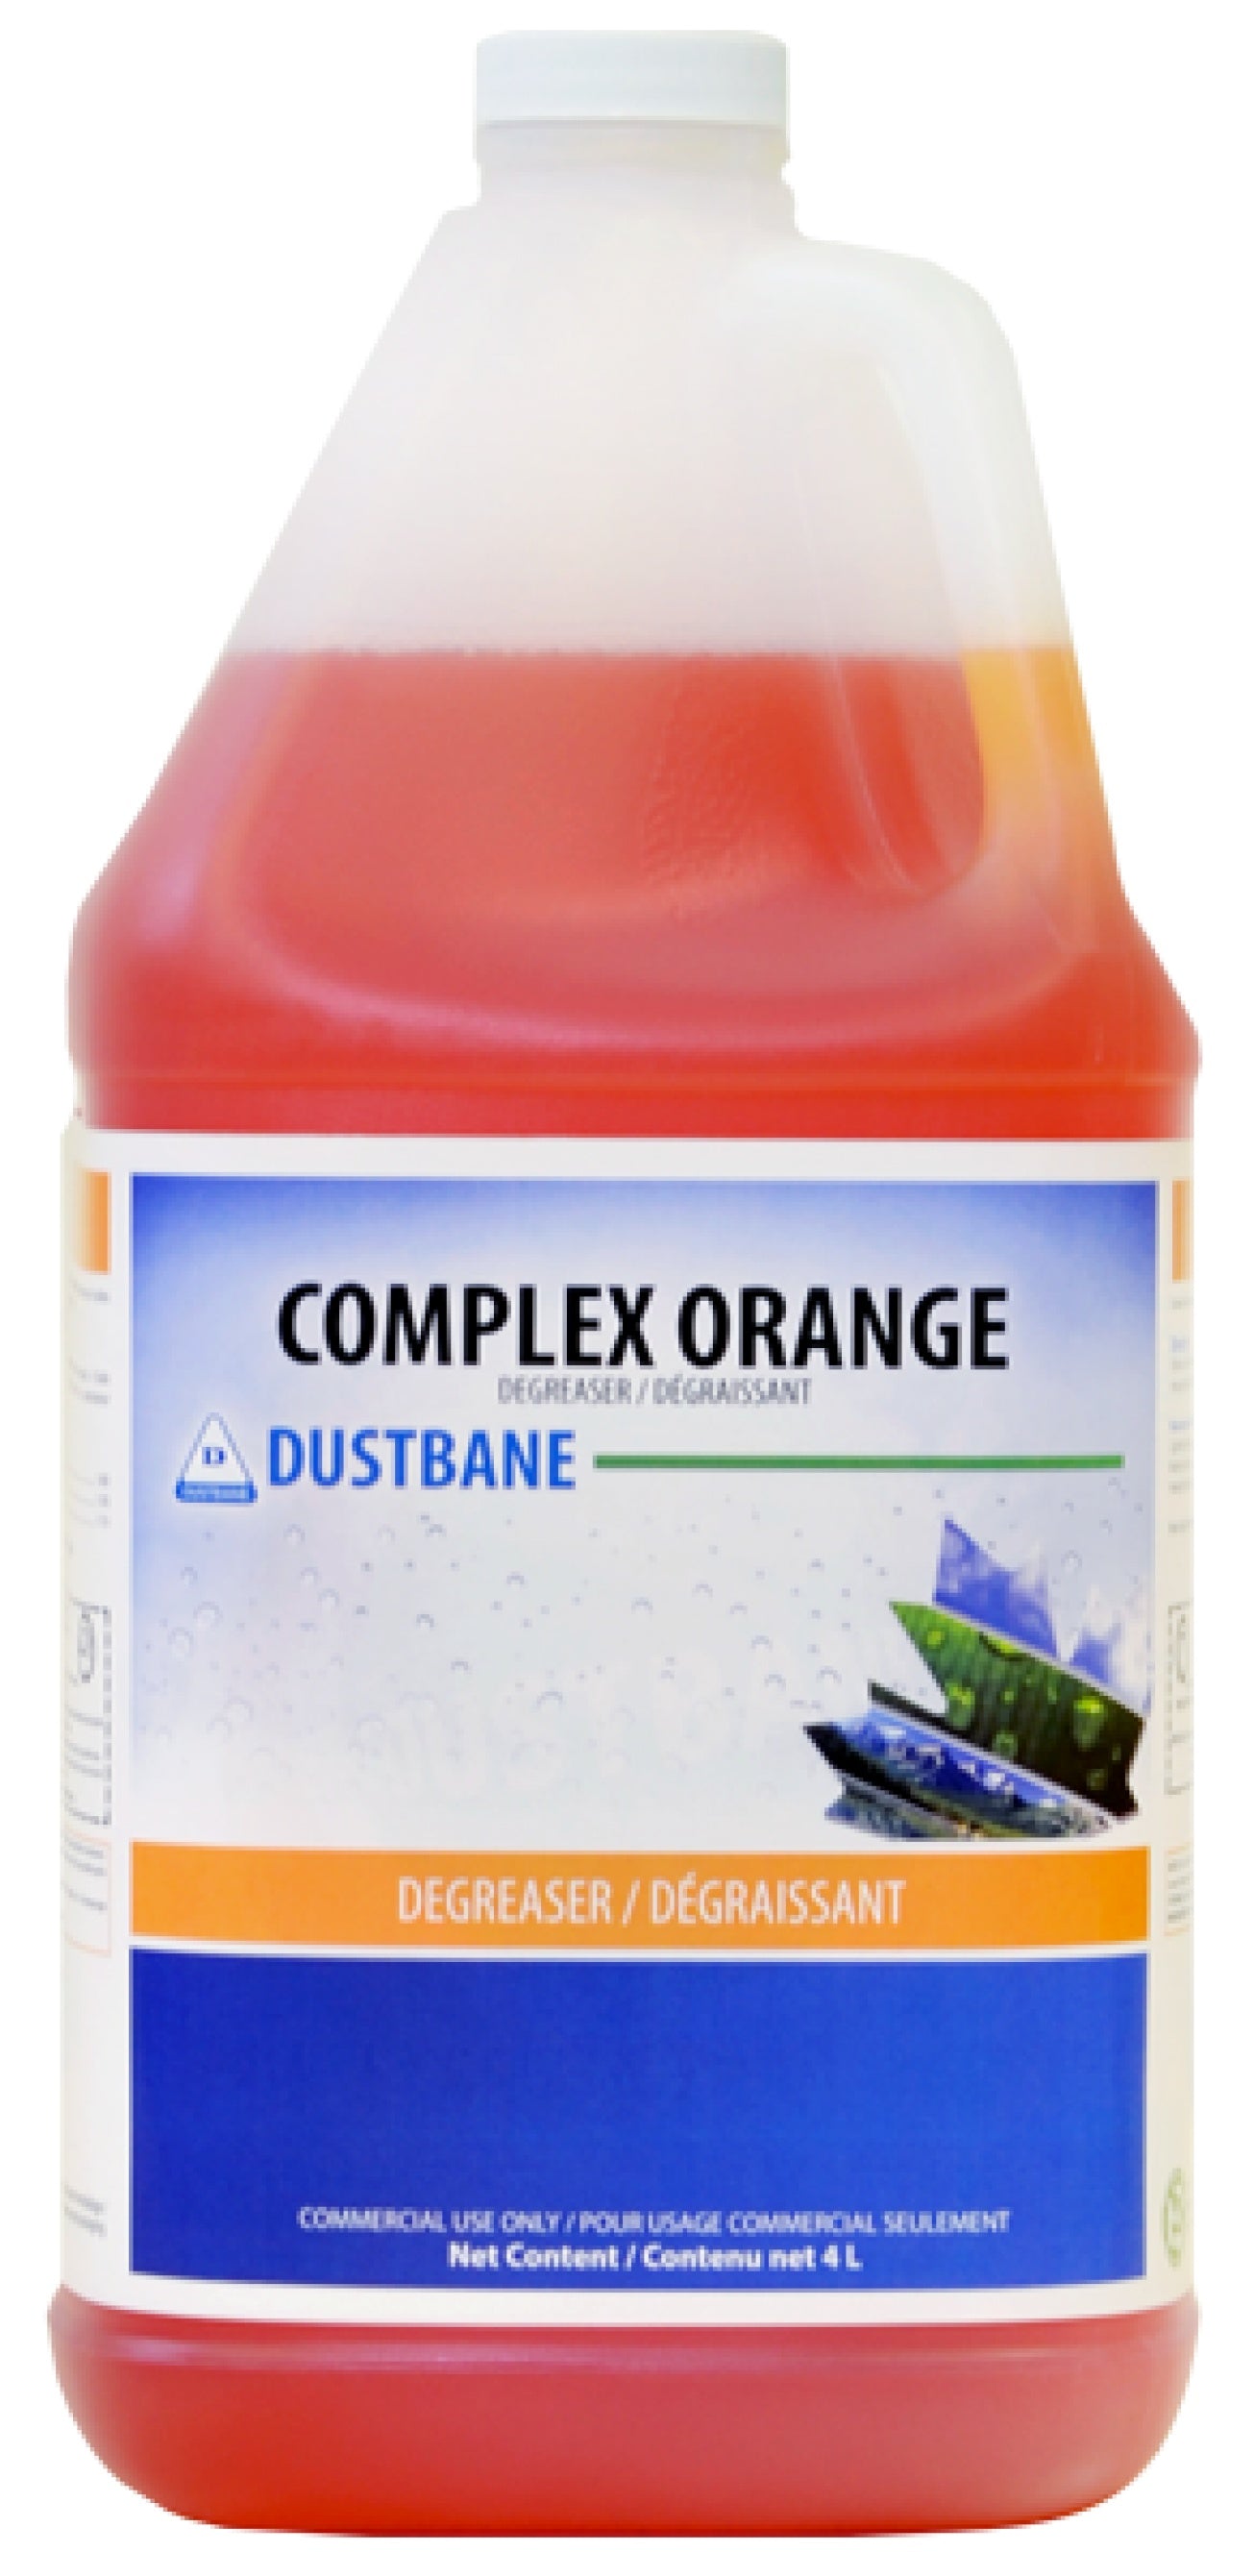 4L DUSTBANE® COMPLEX ORANGE™ DEGREASER, SOLVENT-FREE, CONCENTRATE